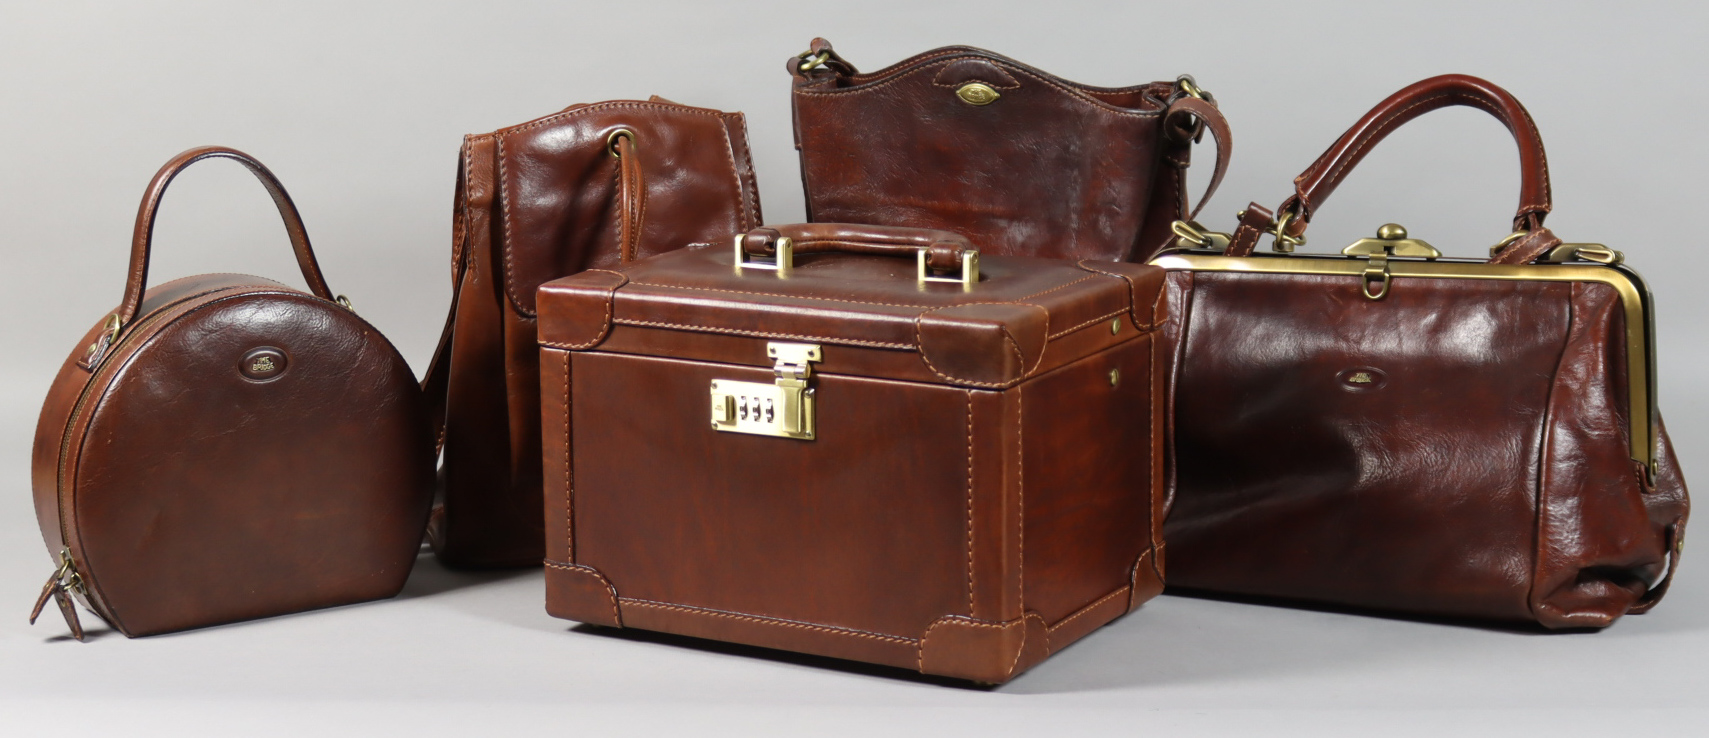 A Selection of The Bridge Brown Leather Bags, including - a rectangular vanity case, 11ins x 8ins